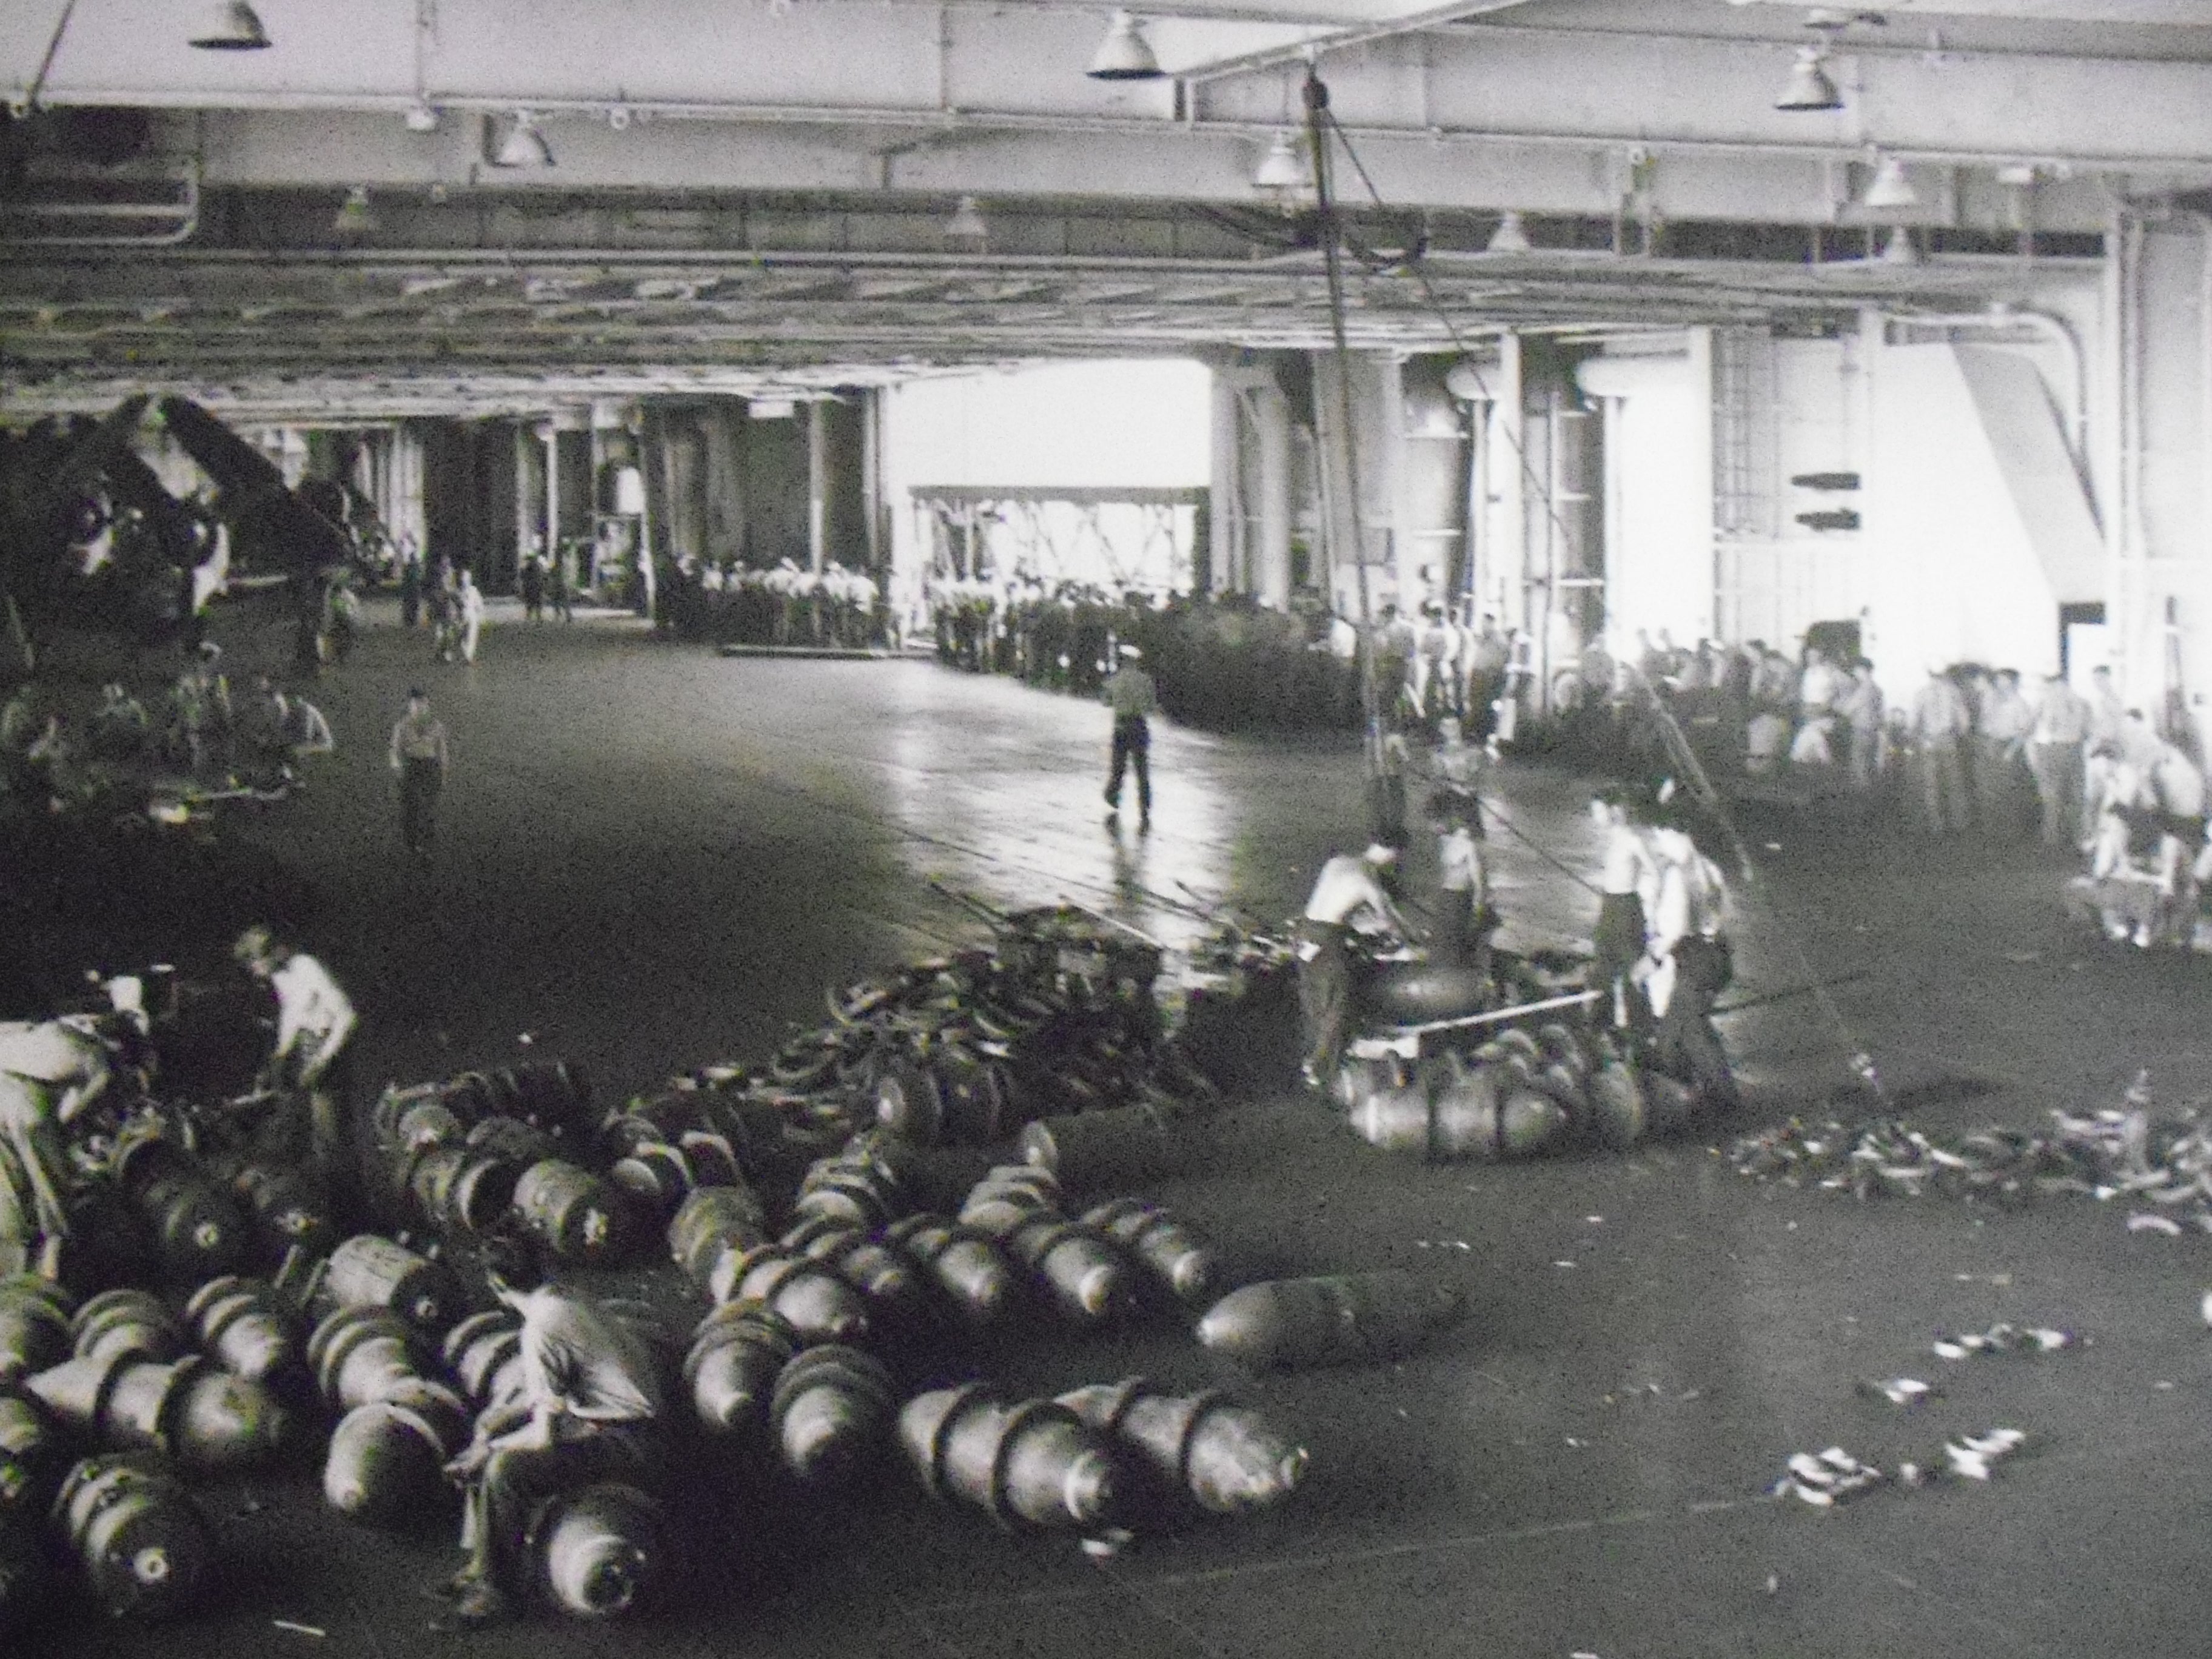 Essex CV-9 079 MP Munitions handling in the hangar bay with the chow line in background..JPG